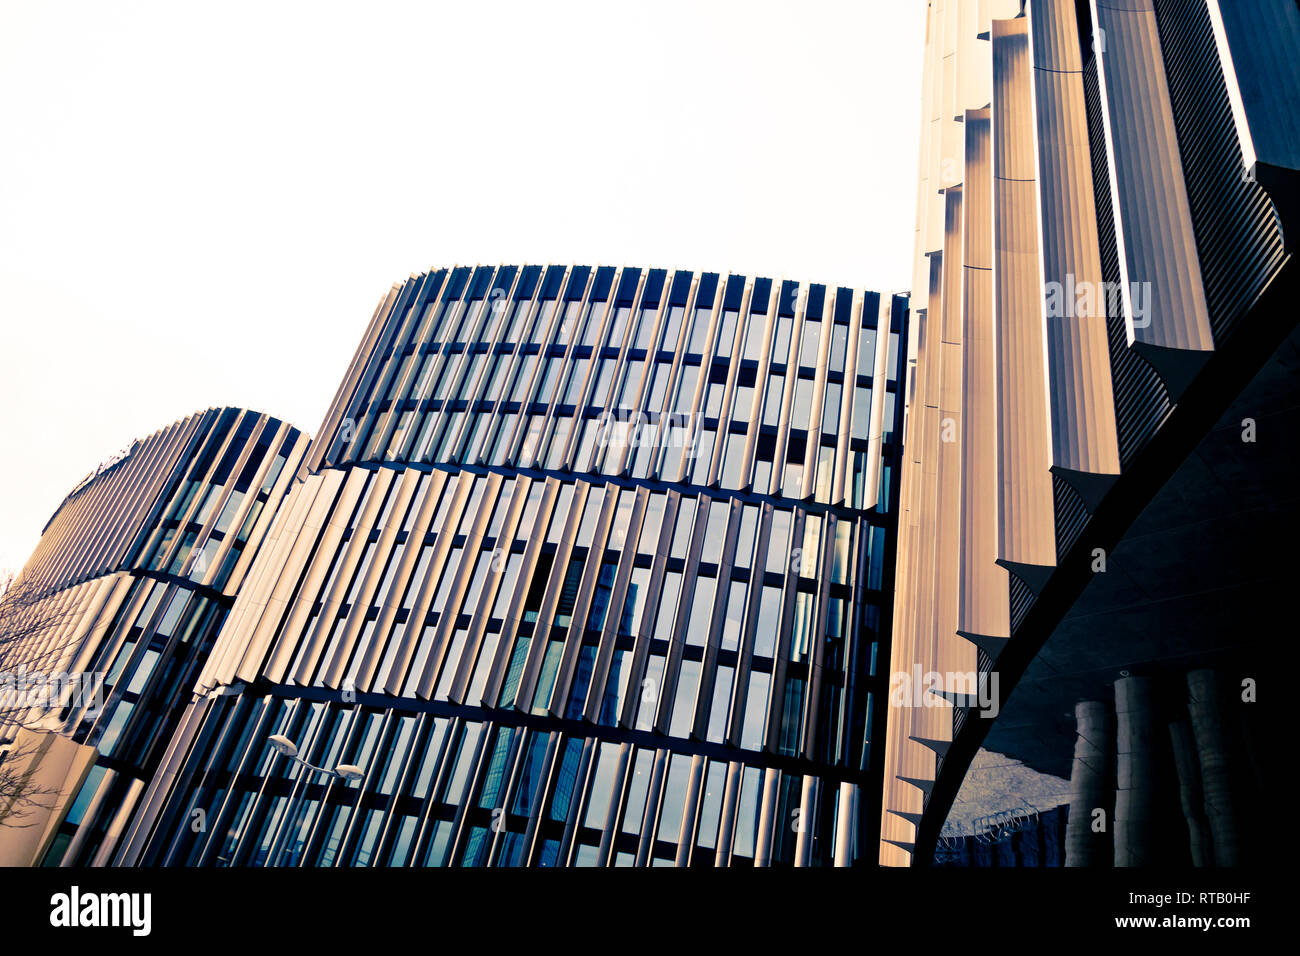 details of the new Main Point Pankrac office building in the Pankrác city skyscrapers area in Prague, Czech Republic Stock Photo